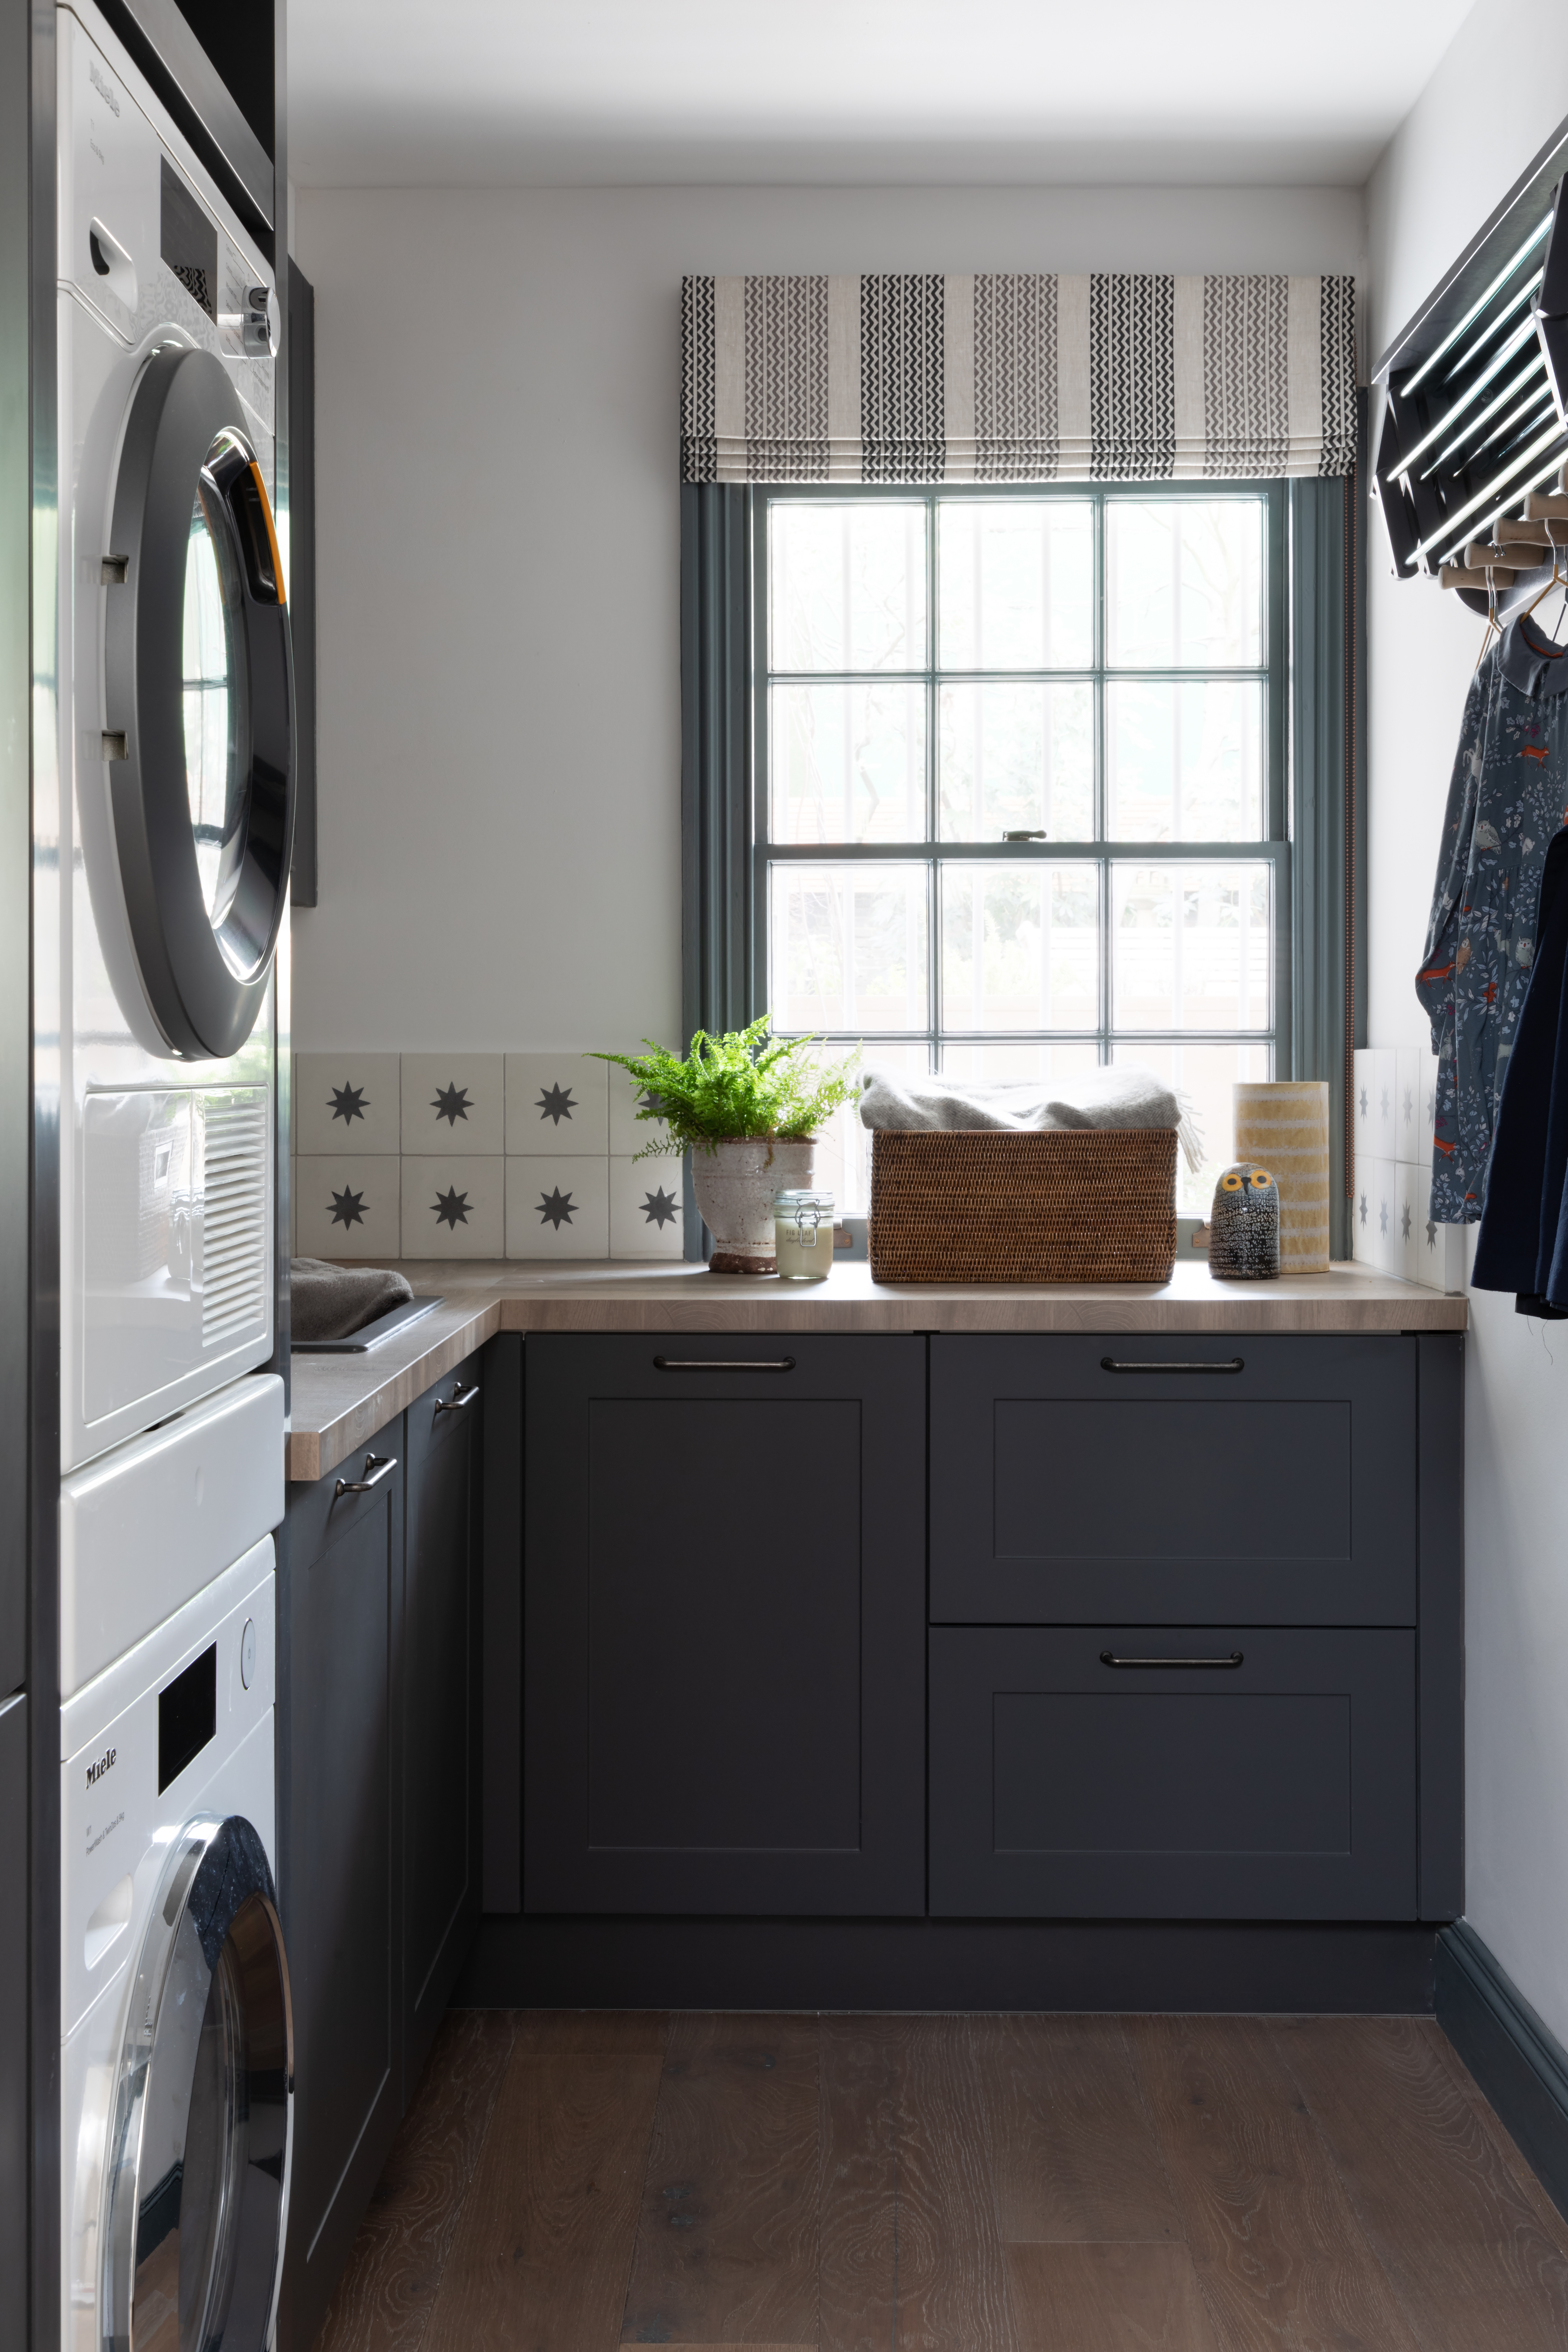 A utility room in shades of grey with motif tiles and washing appliances stacked on top of each other